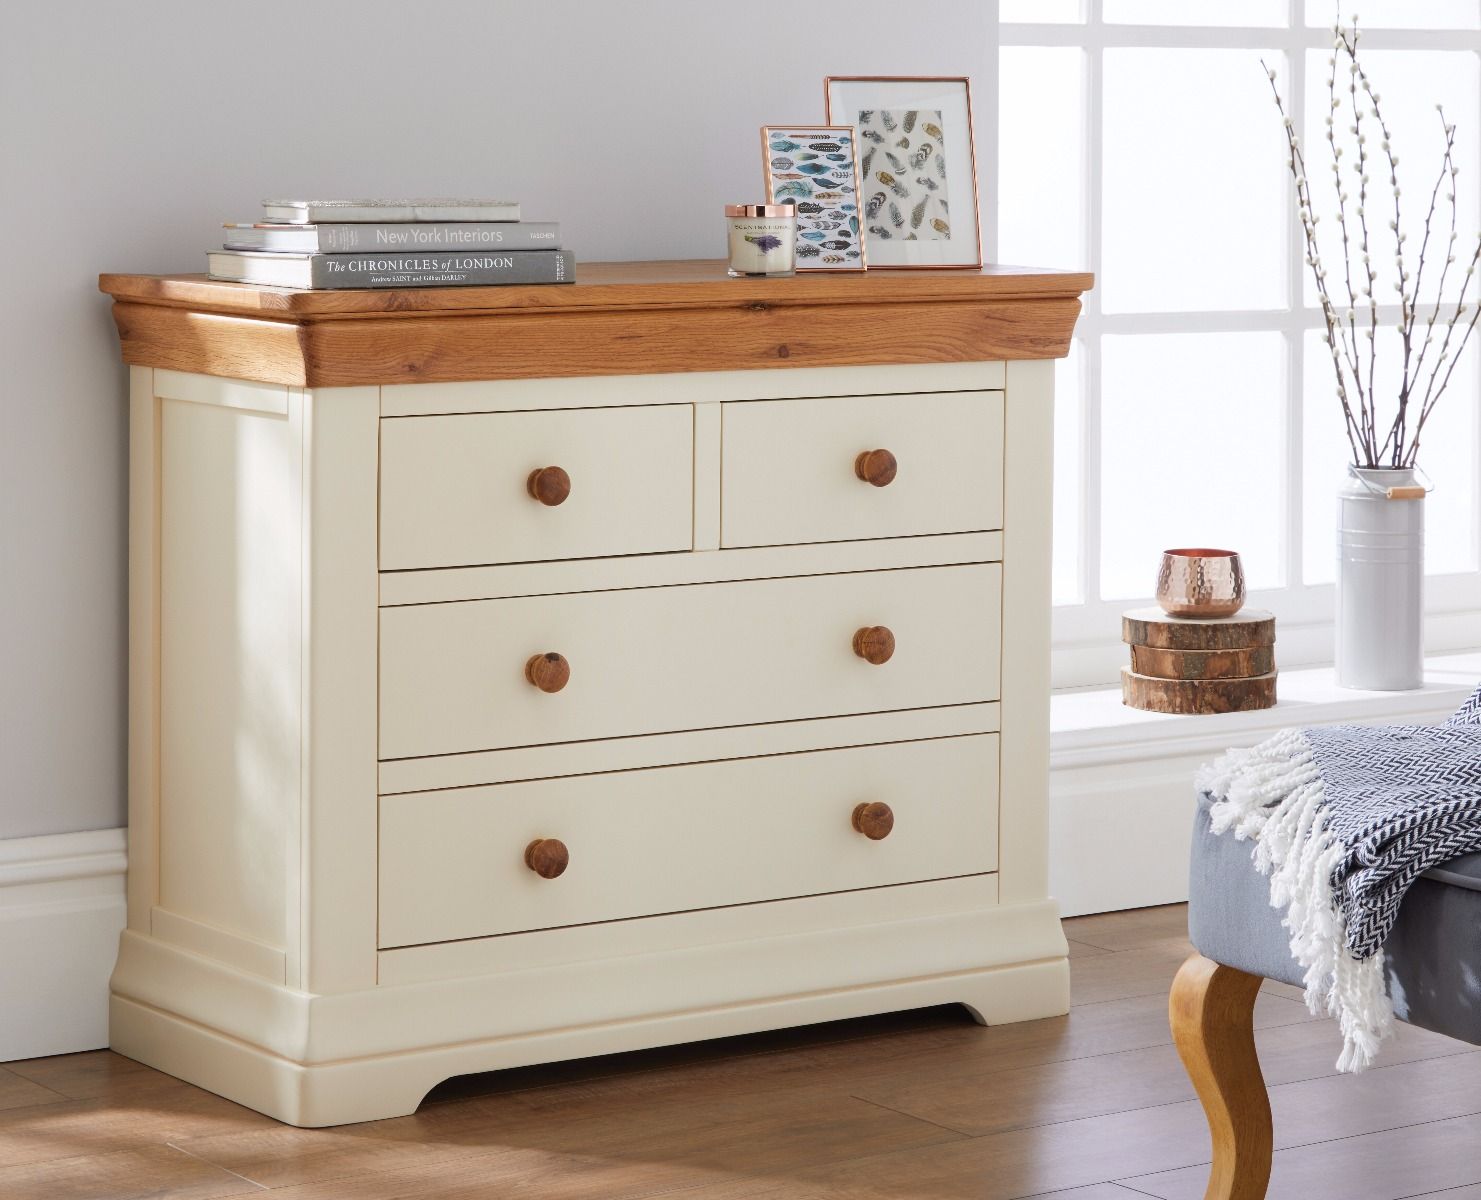 Farmhouse Country Oak Cream Painted 2 Over 2 Chest of Drawers - 10% OFF CODE SAVE